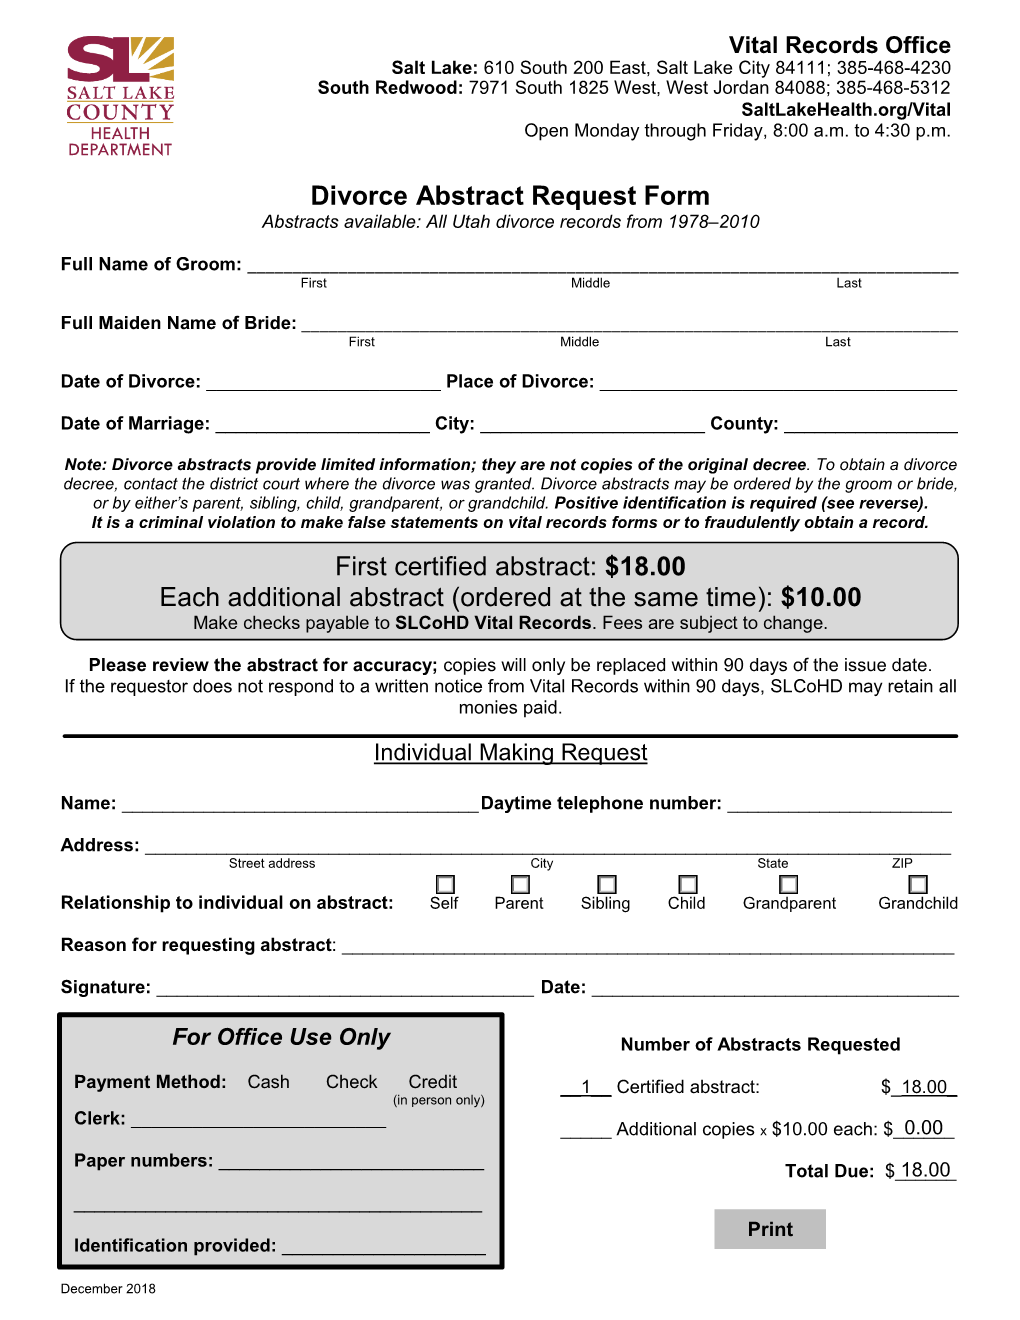 Divorce Abstract Request Form First Certified Abstract